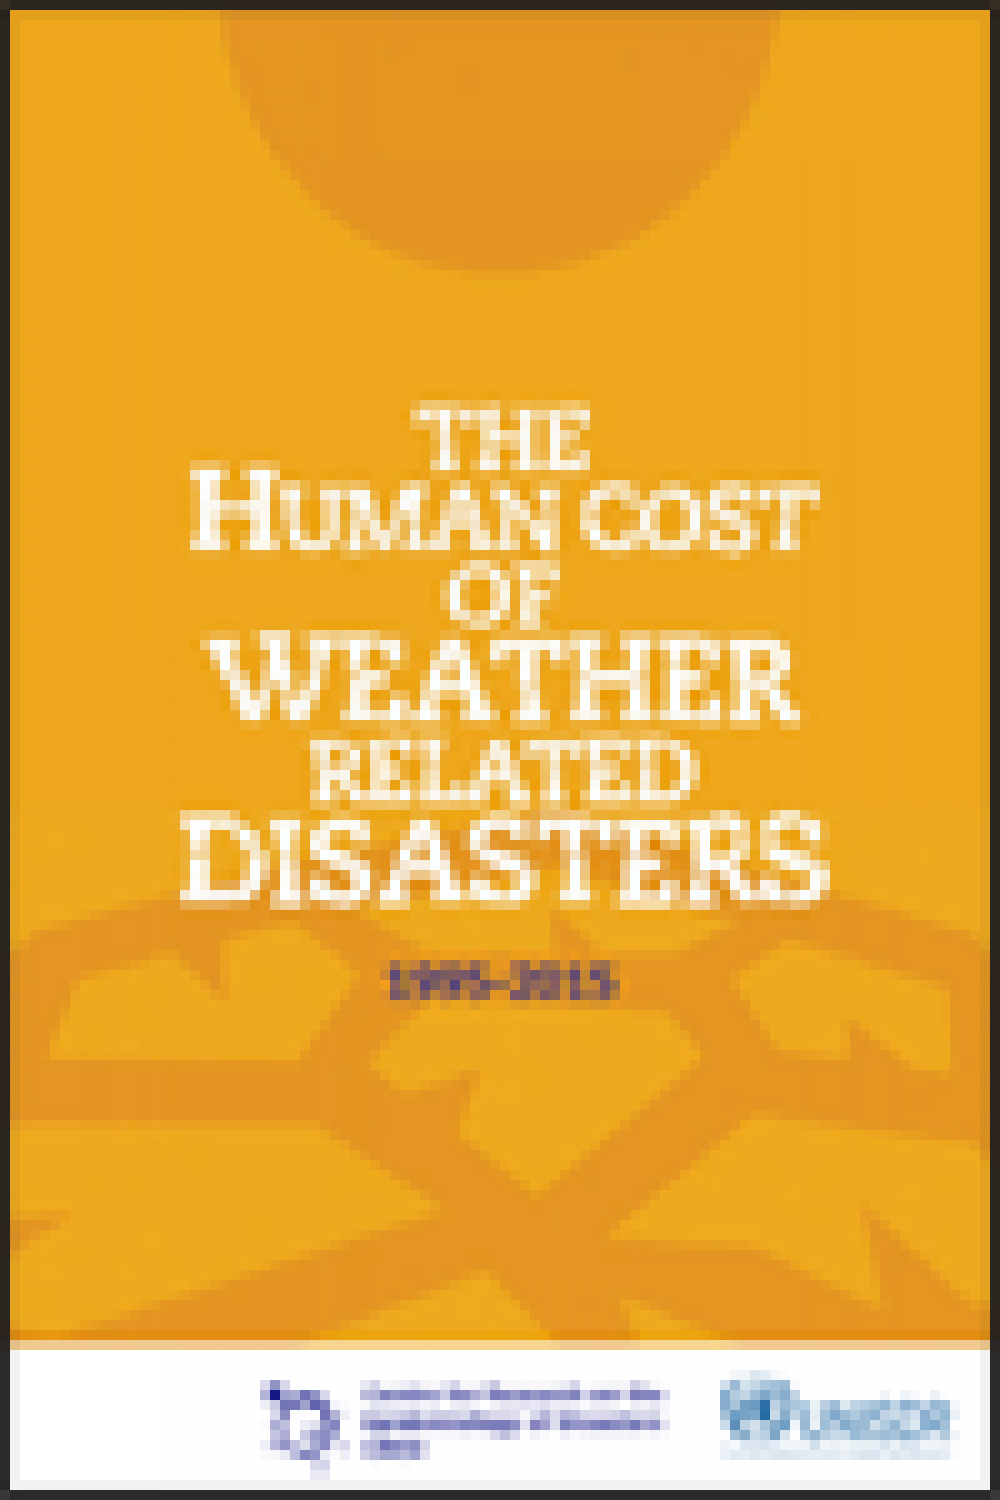 The Human Cost of Weather Related Disasters 1995 to 2015